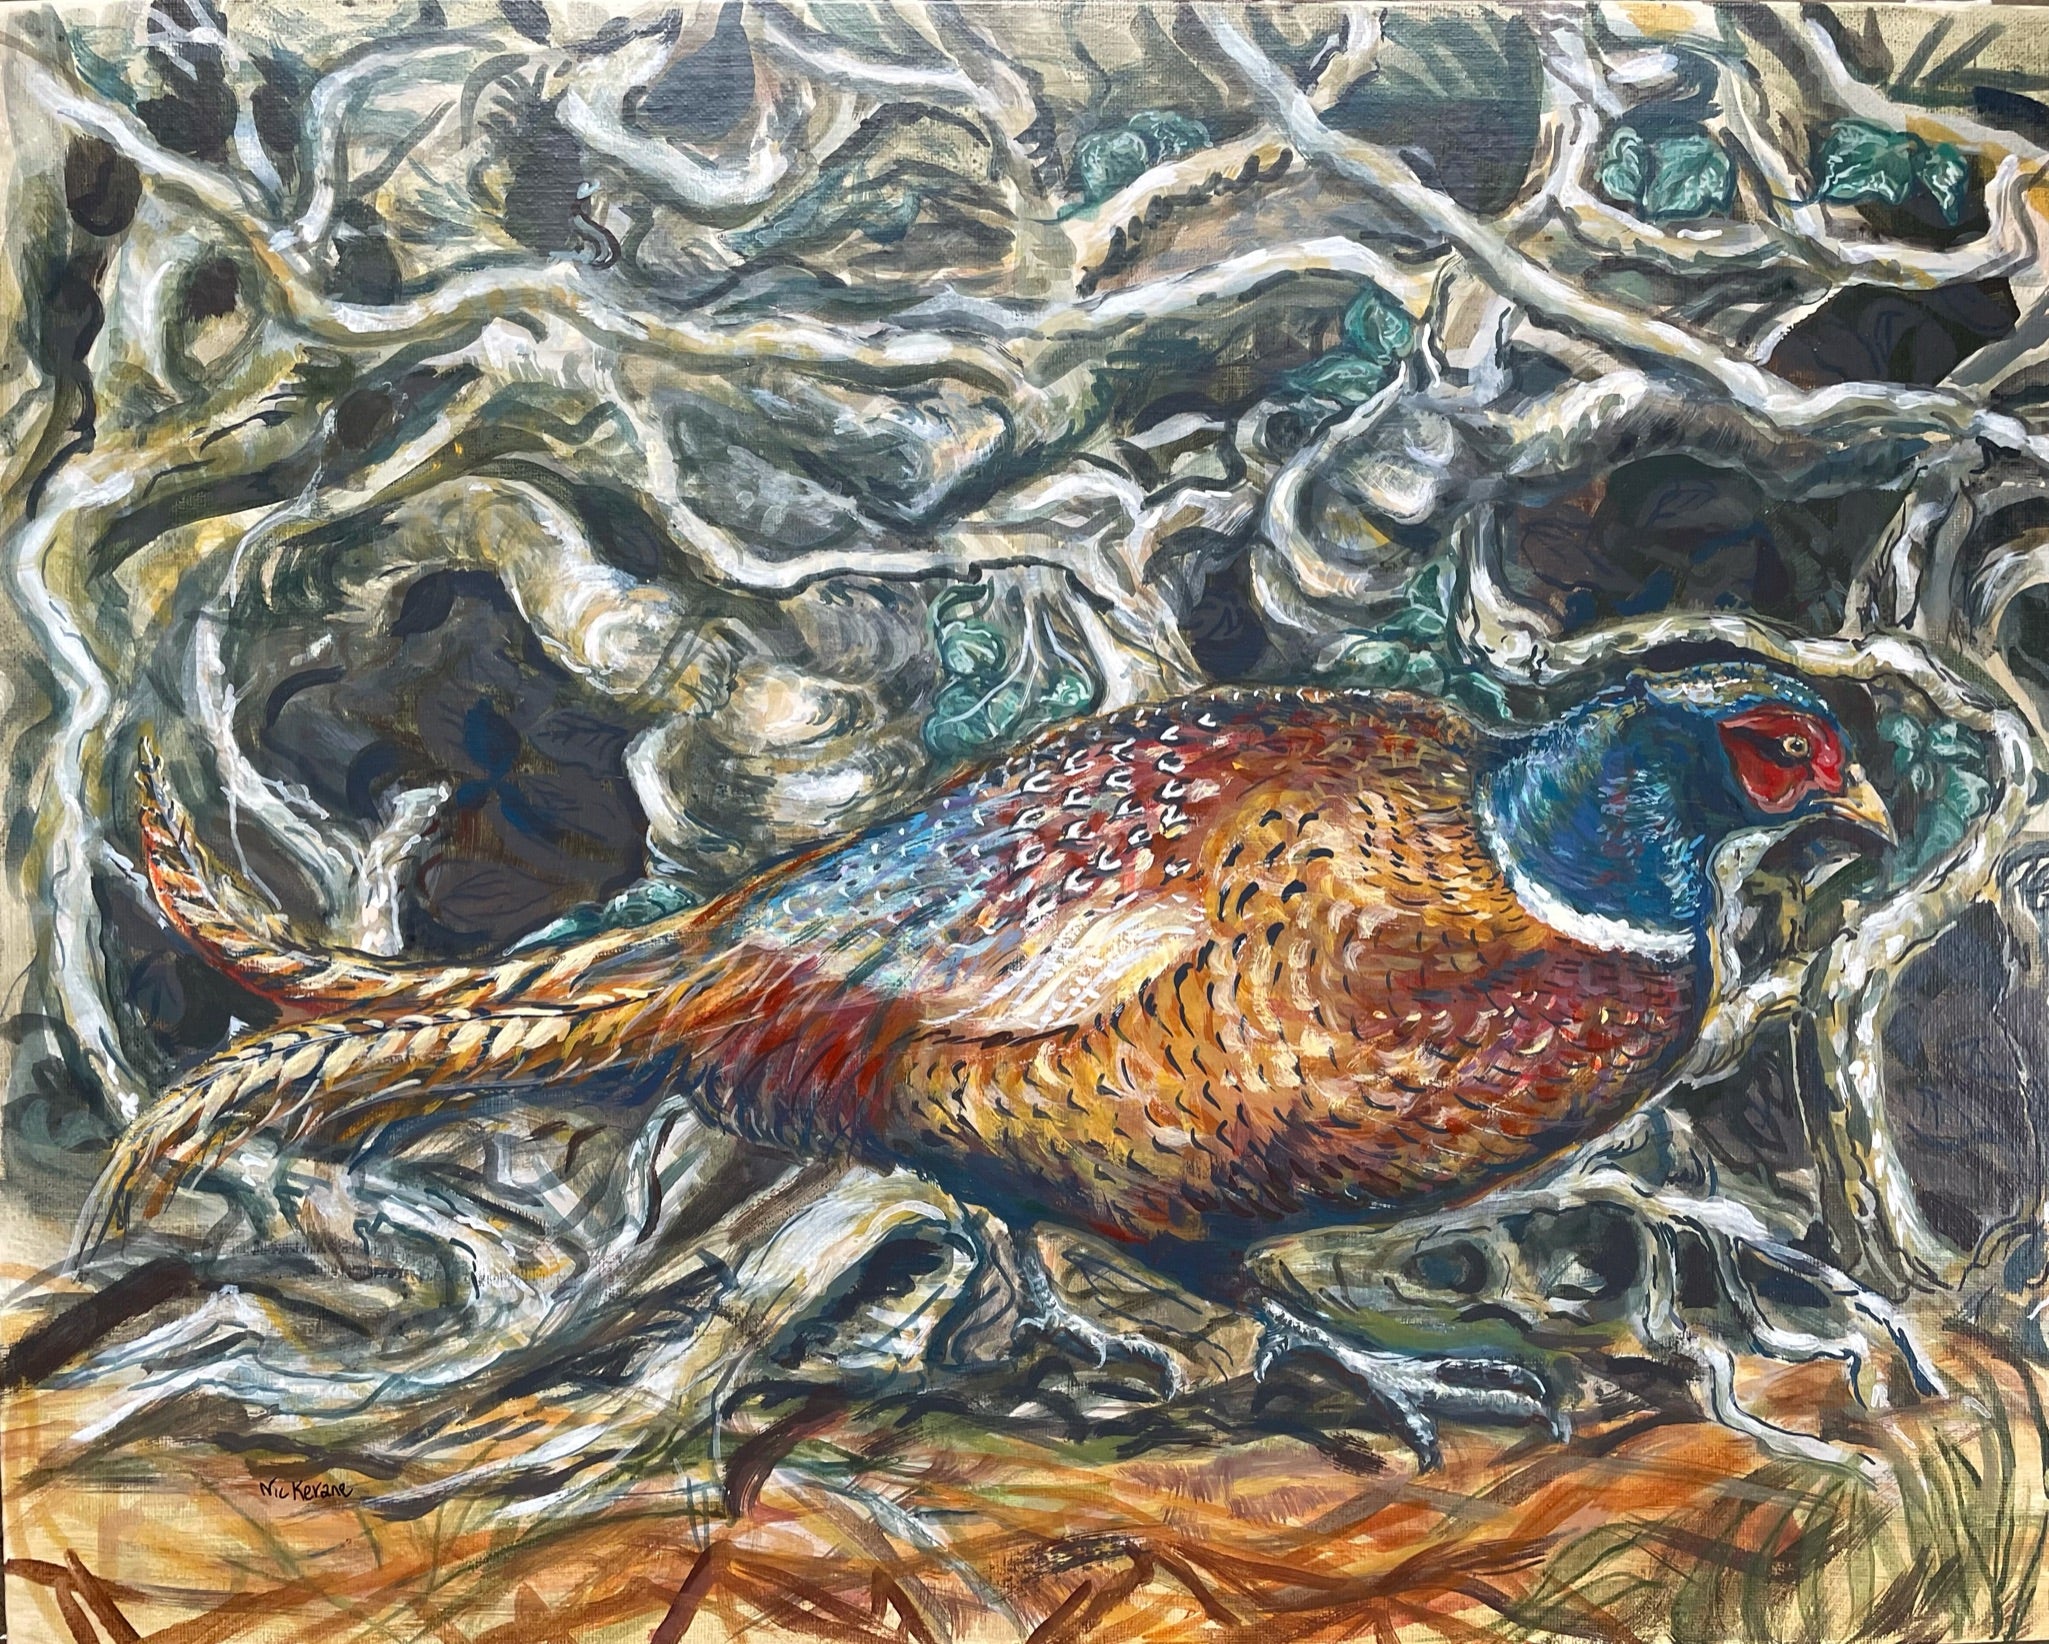 Pheasant in the hedge  This painting depicts a pheasant darting through the bottom of a native hedge.